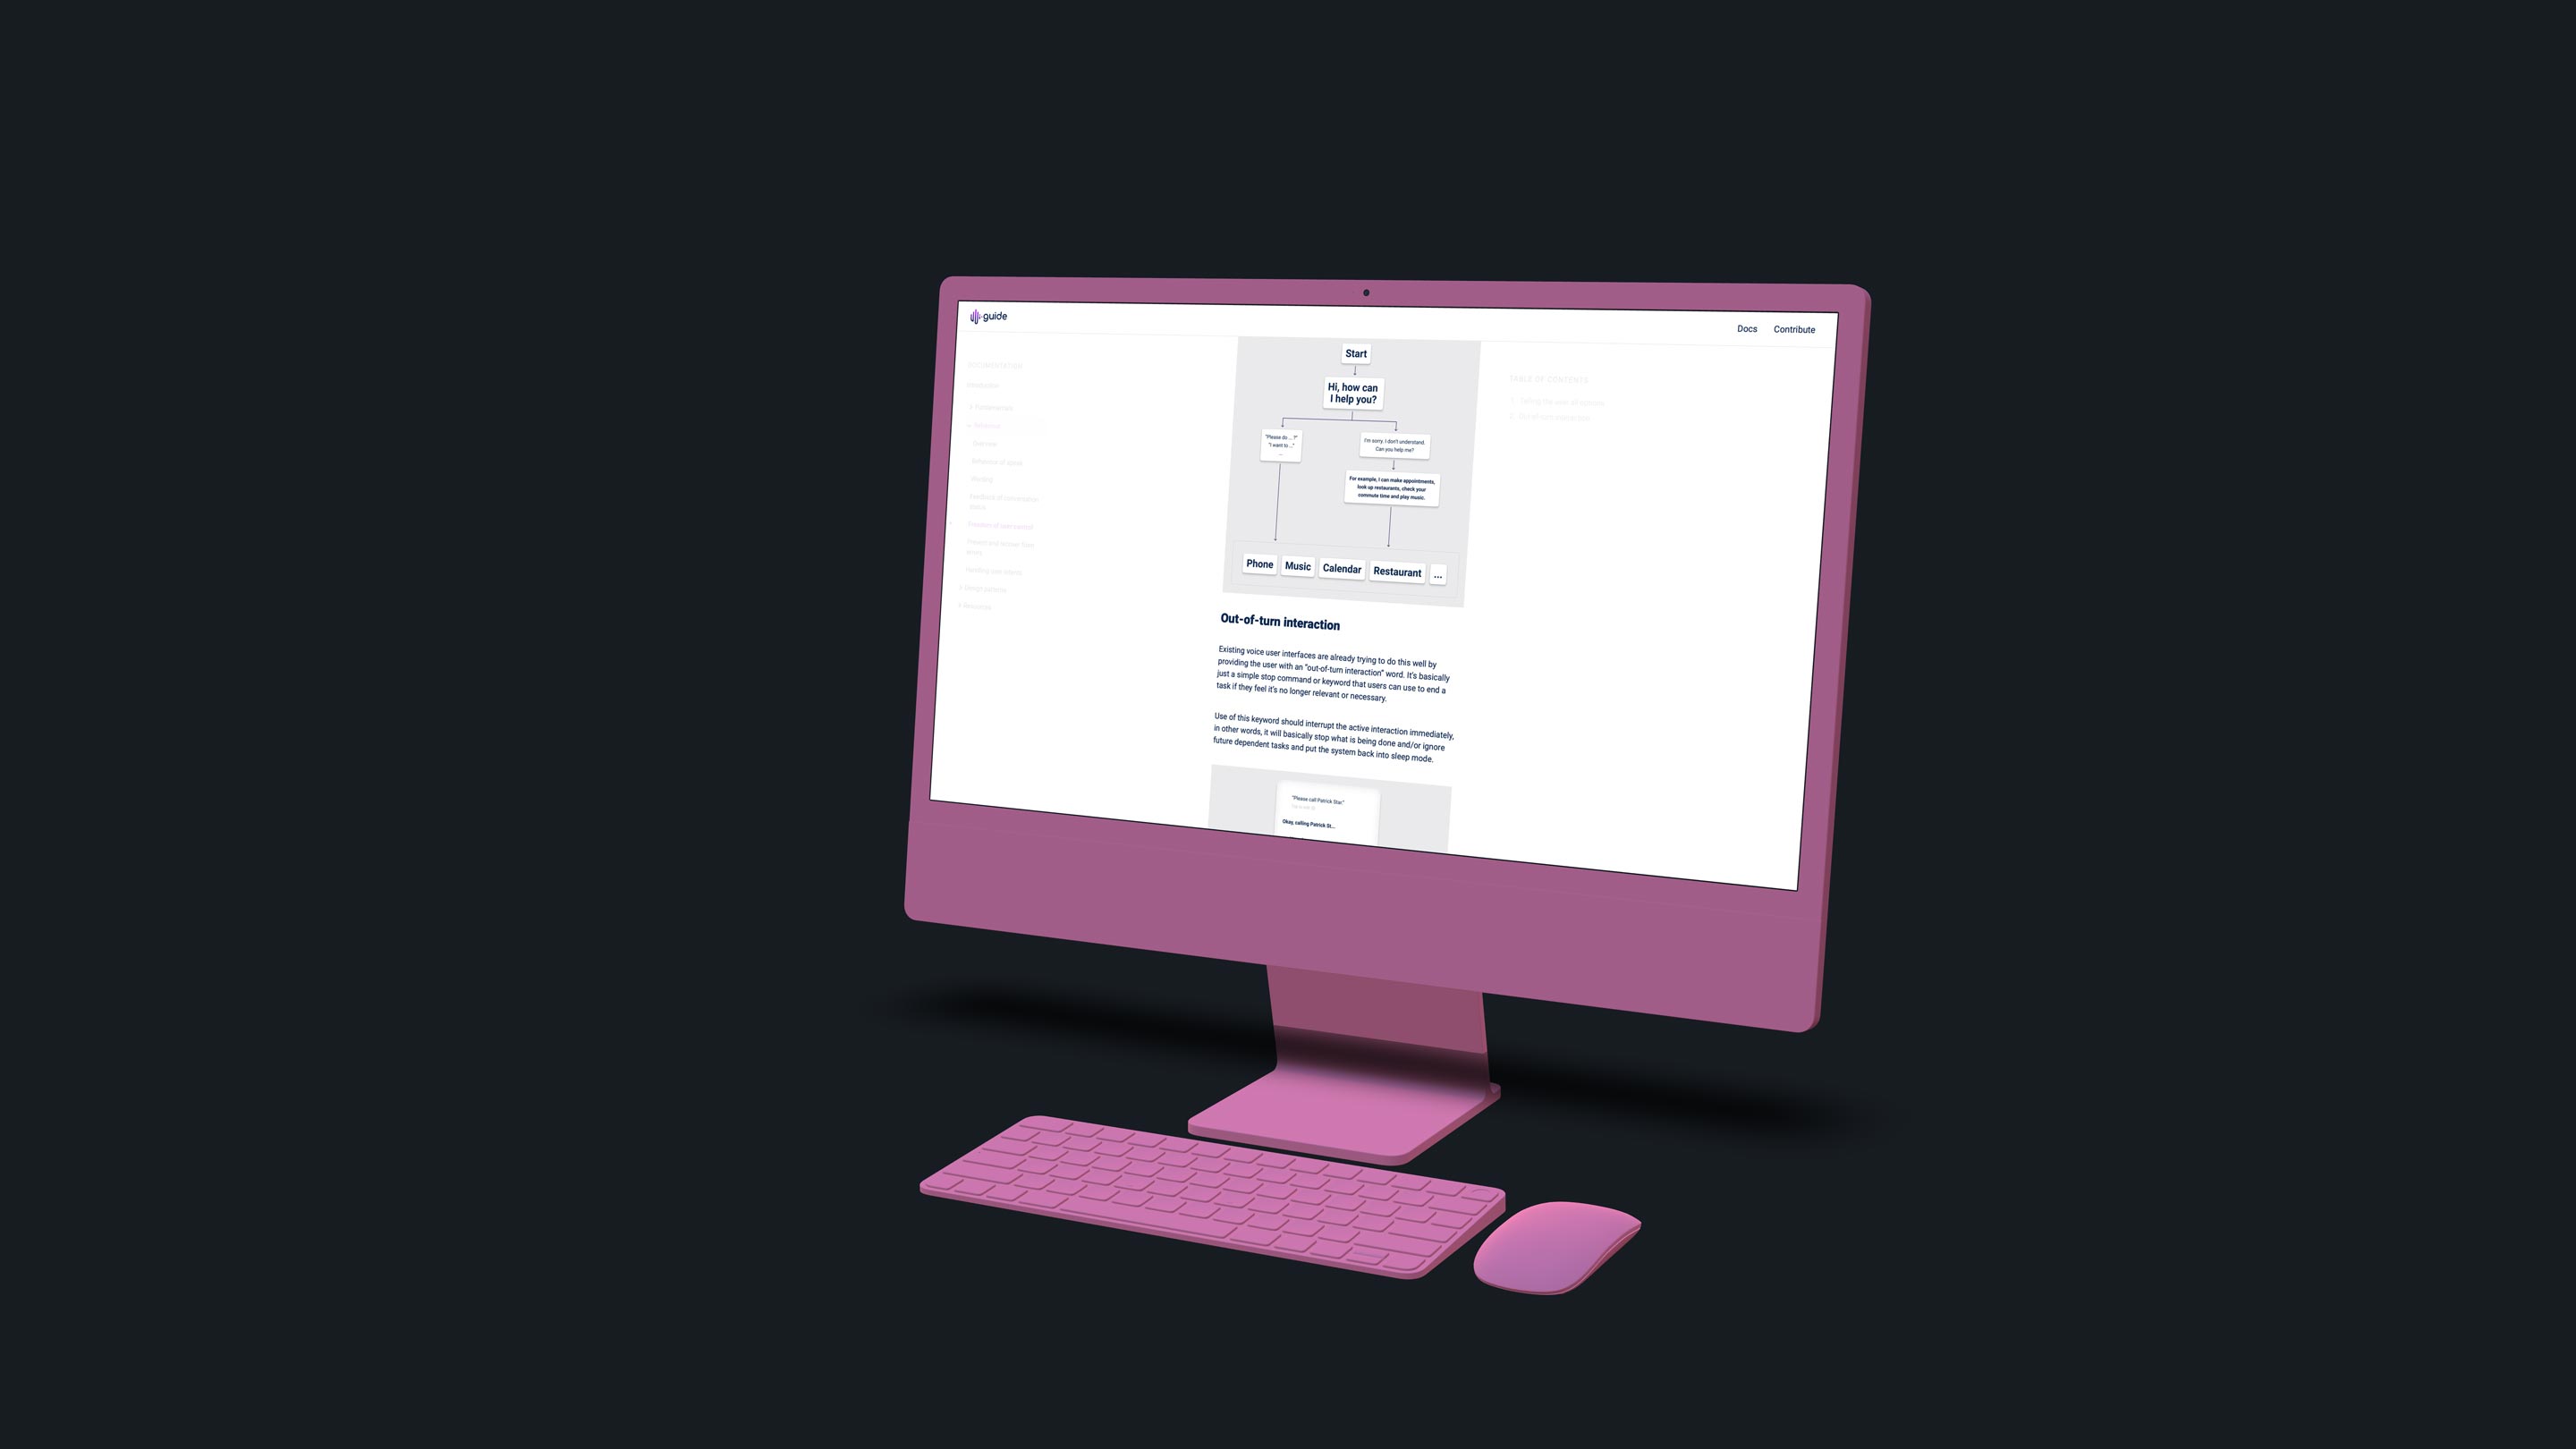 An iMac mockup showing the user interface design.